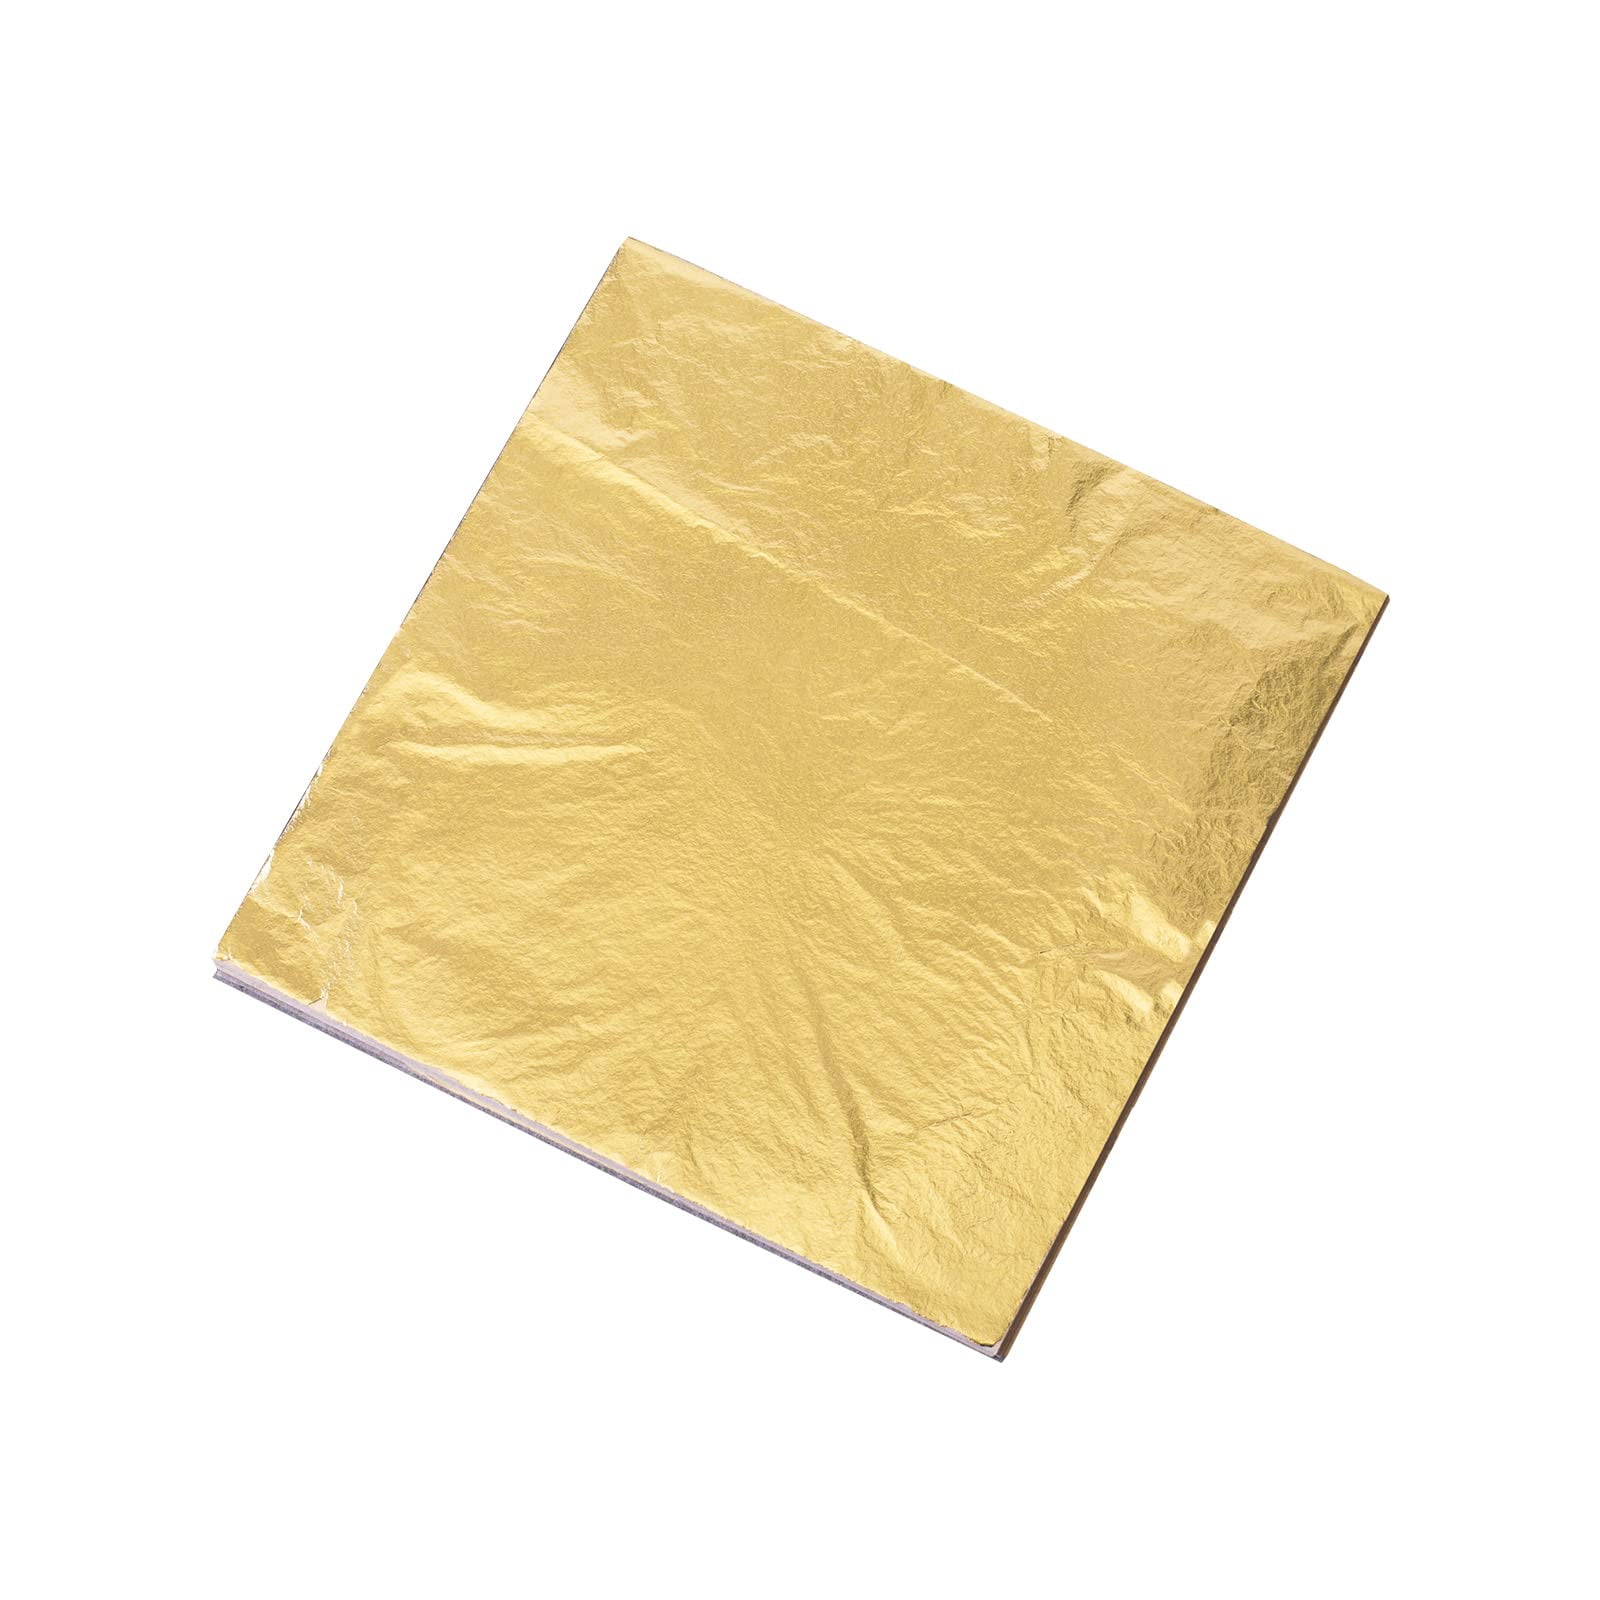 200pcs Gold Leaf Sheets Imitation Gold Silver Leaf Sheets Metallic Leaf for  Gilding Crafts, Nail Arts, Furniture Decoration,Paintings(5.5×5.5inches) 